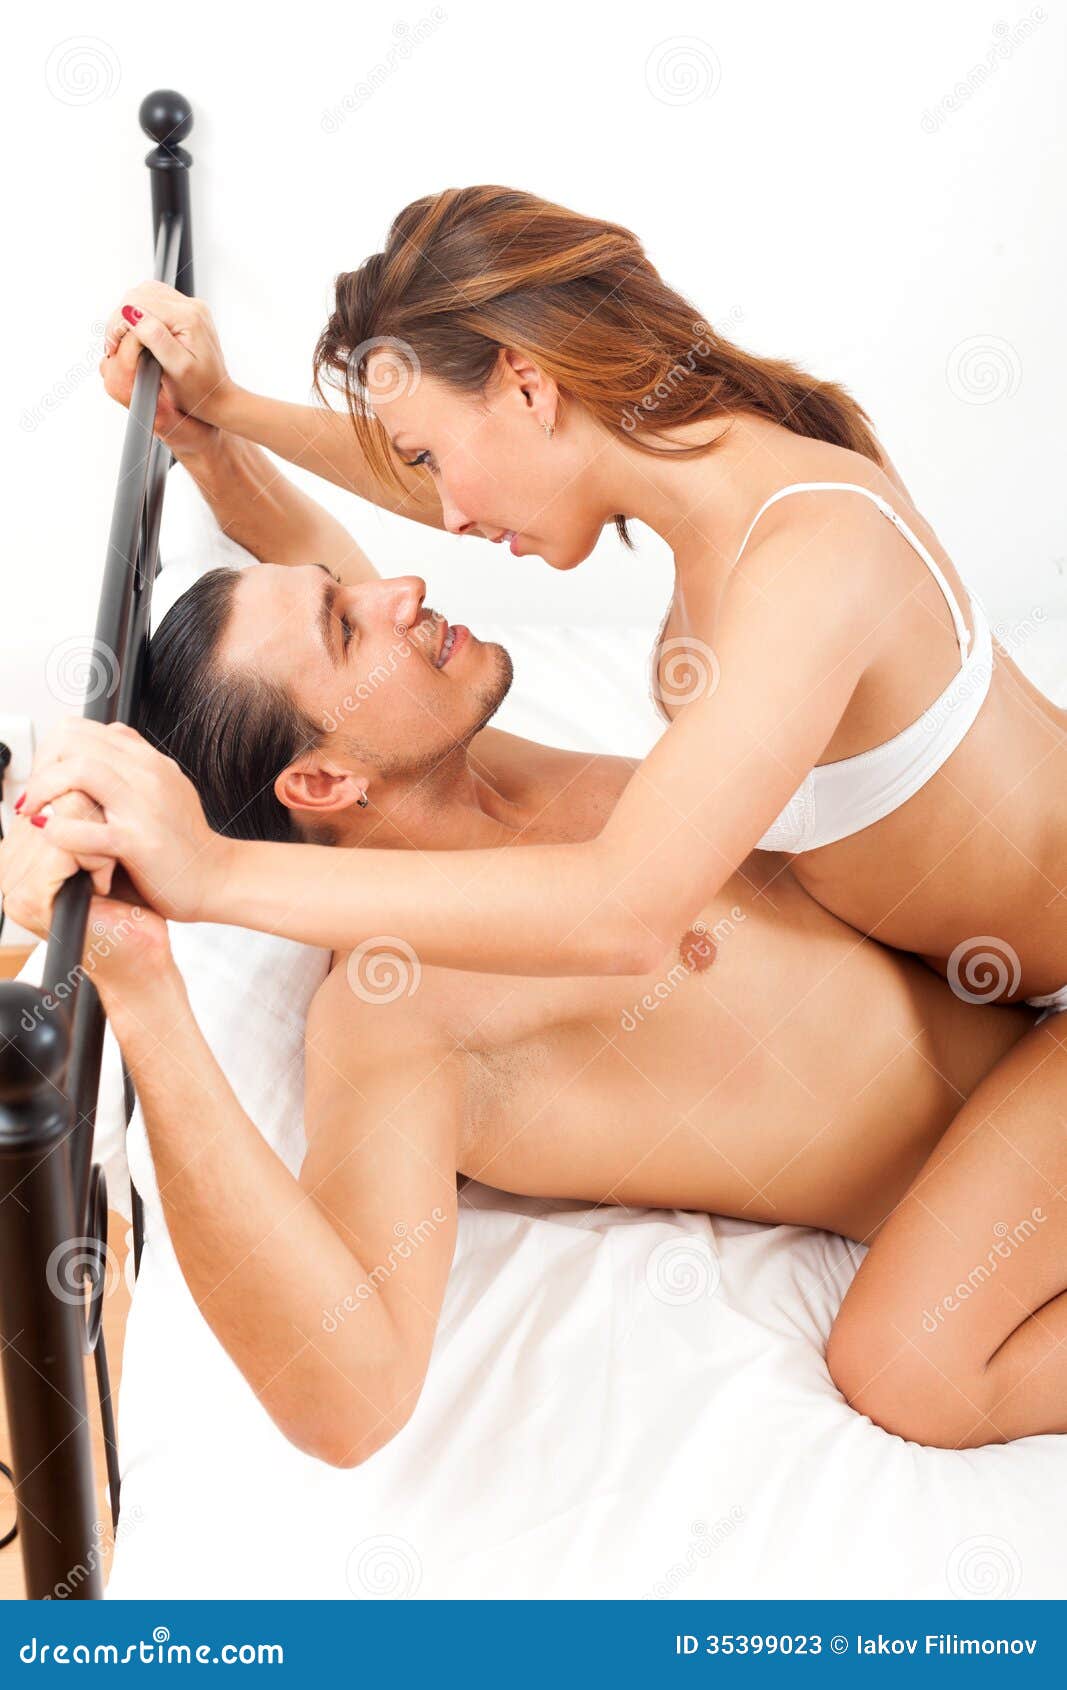 Playfull Adult Couple Having Sex on Bed in Bedroom Interior Stock Image